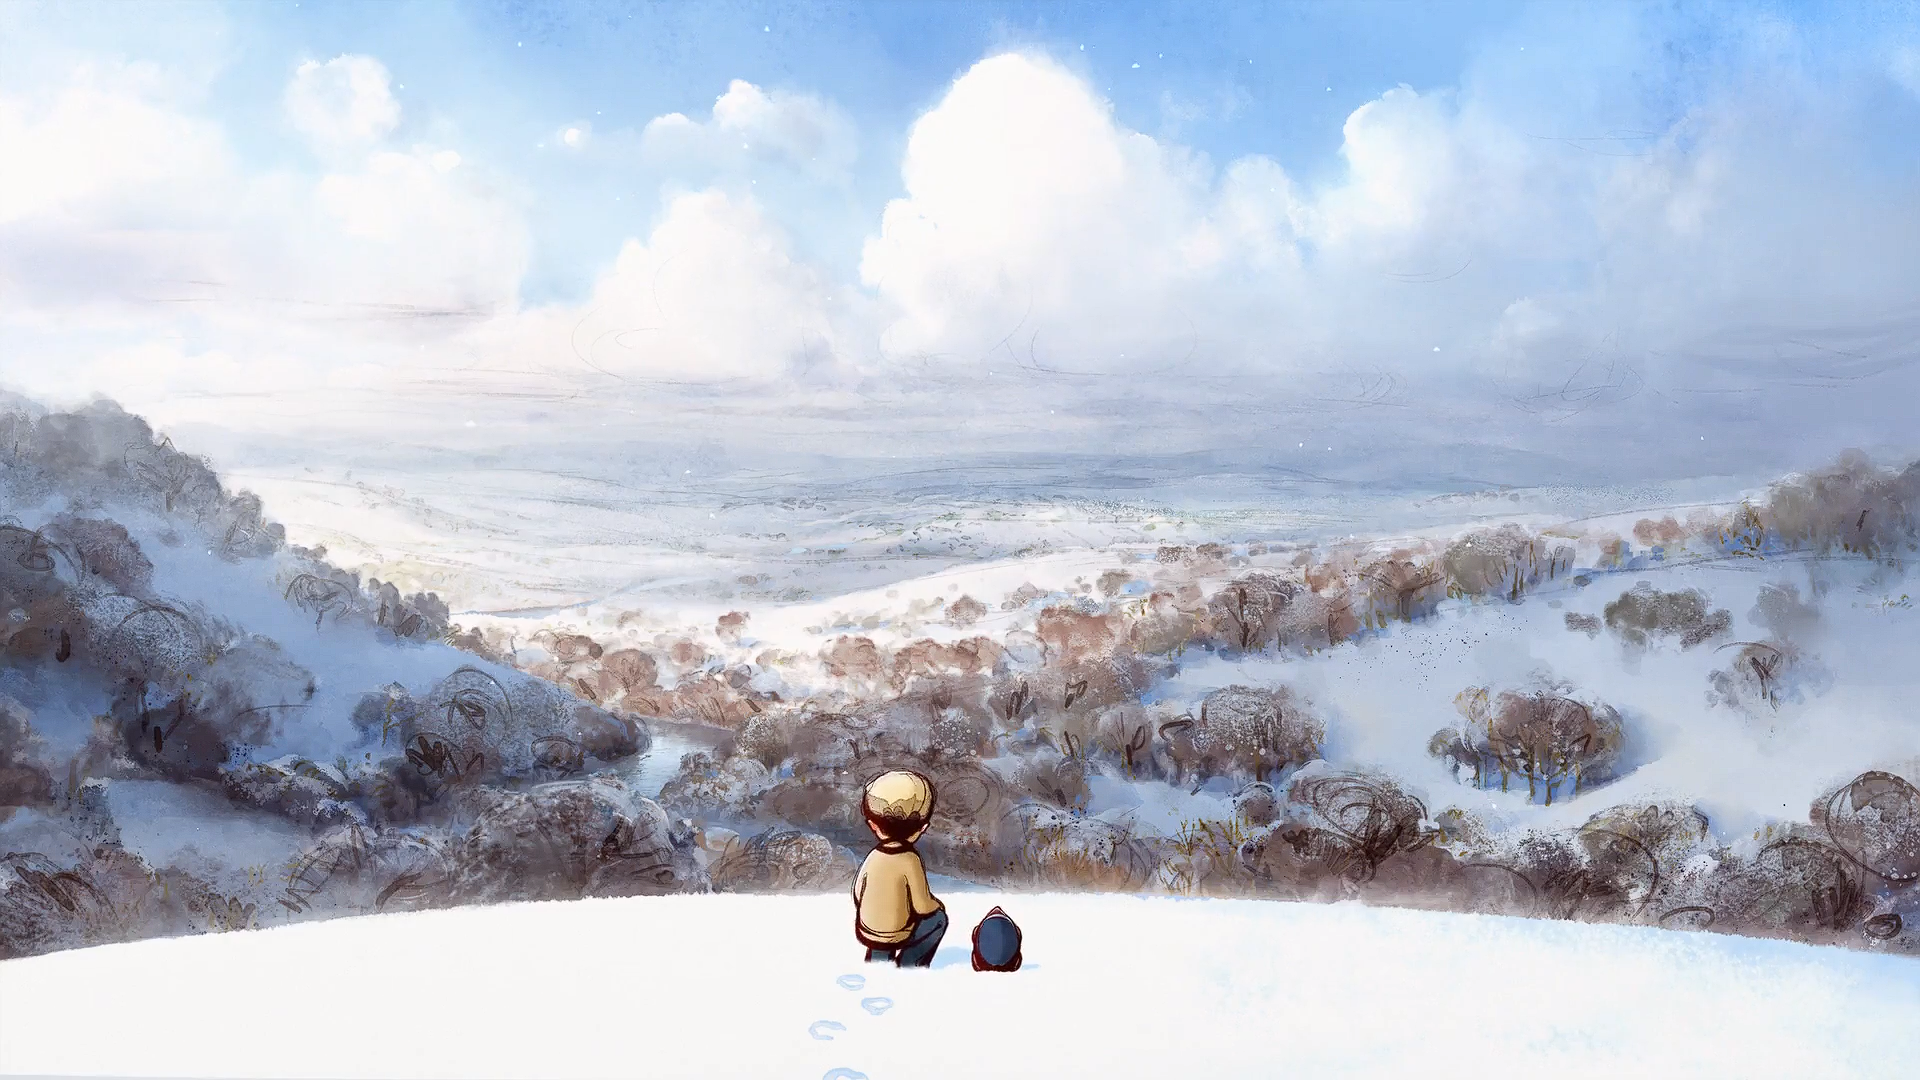 The Boy The Mole The Fox And The Horse Animation Movie Characters Movie Scenes Winter Snow Mole Anim 1920x1080